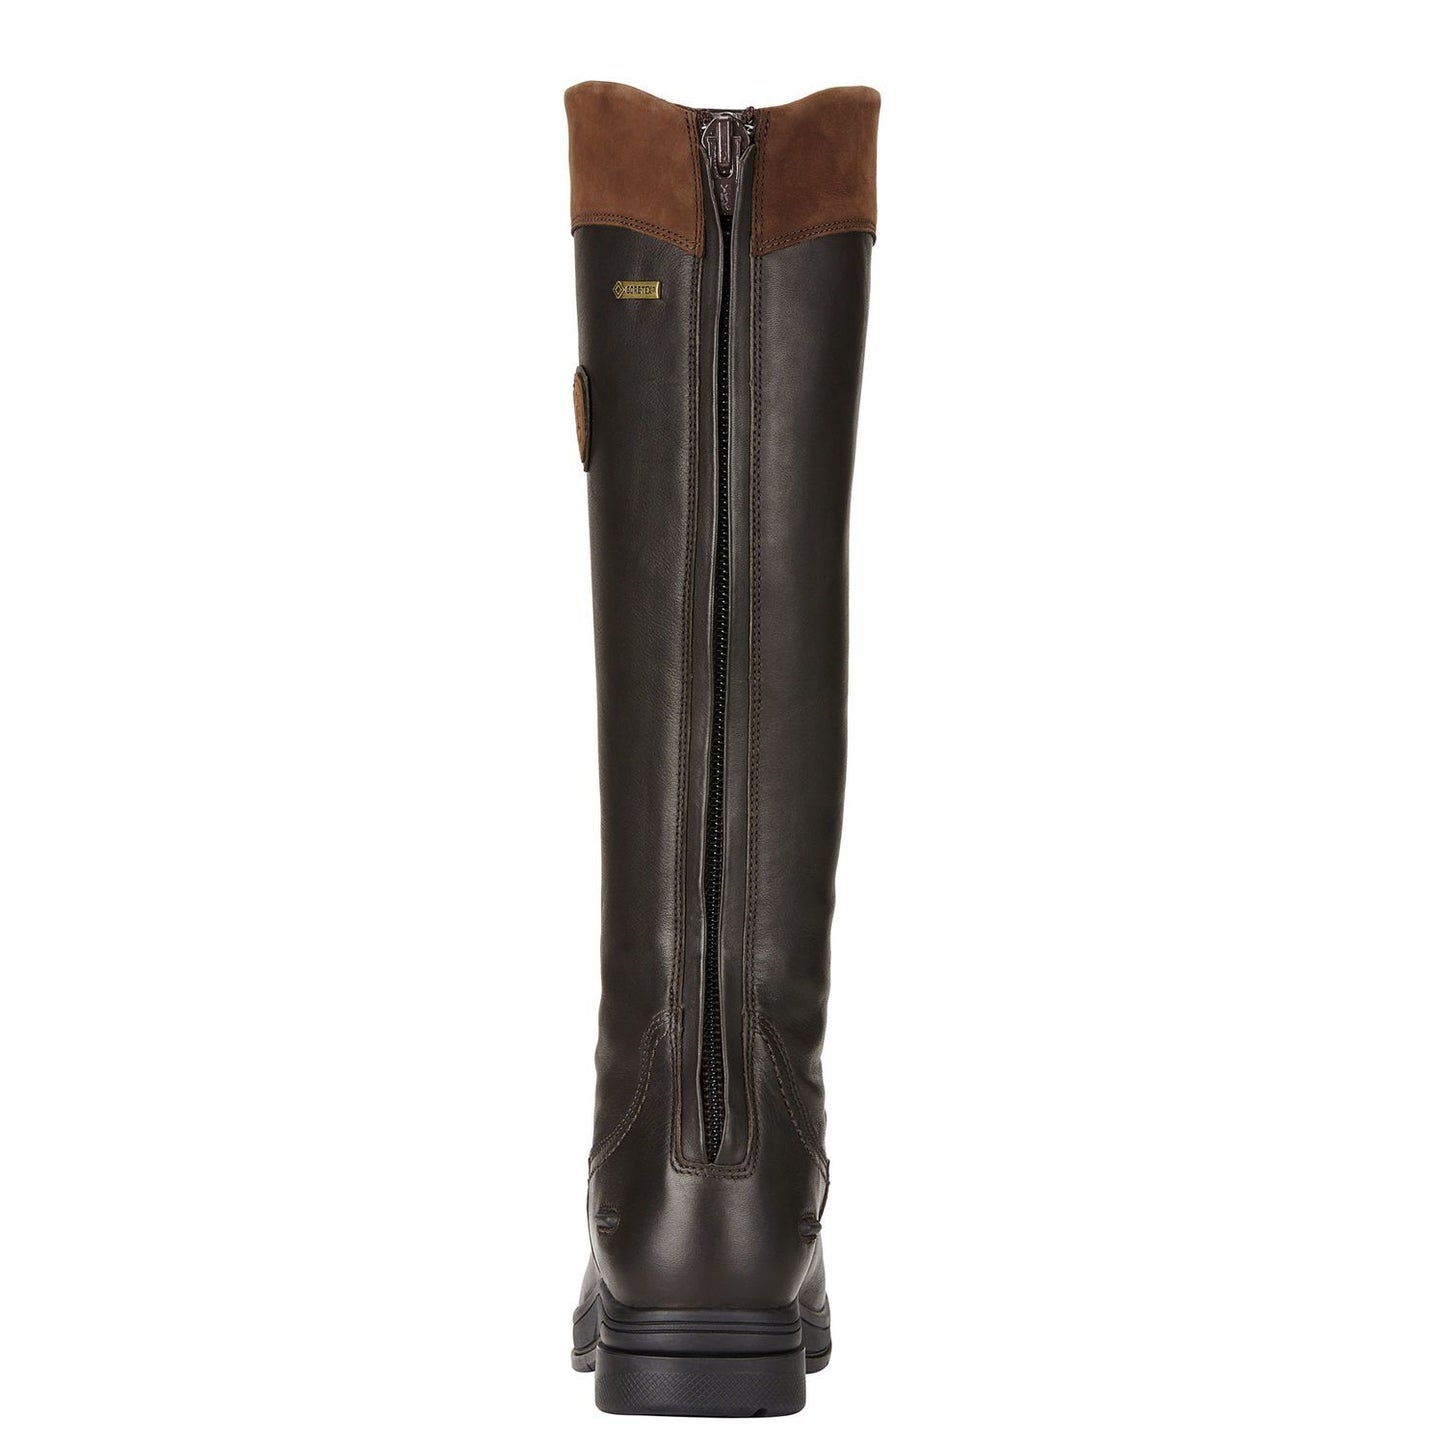 Ariat Womens Country Boots Coniston Pro GTX Insulated Ebony Brown